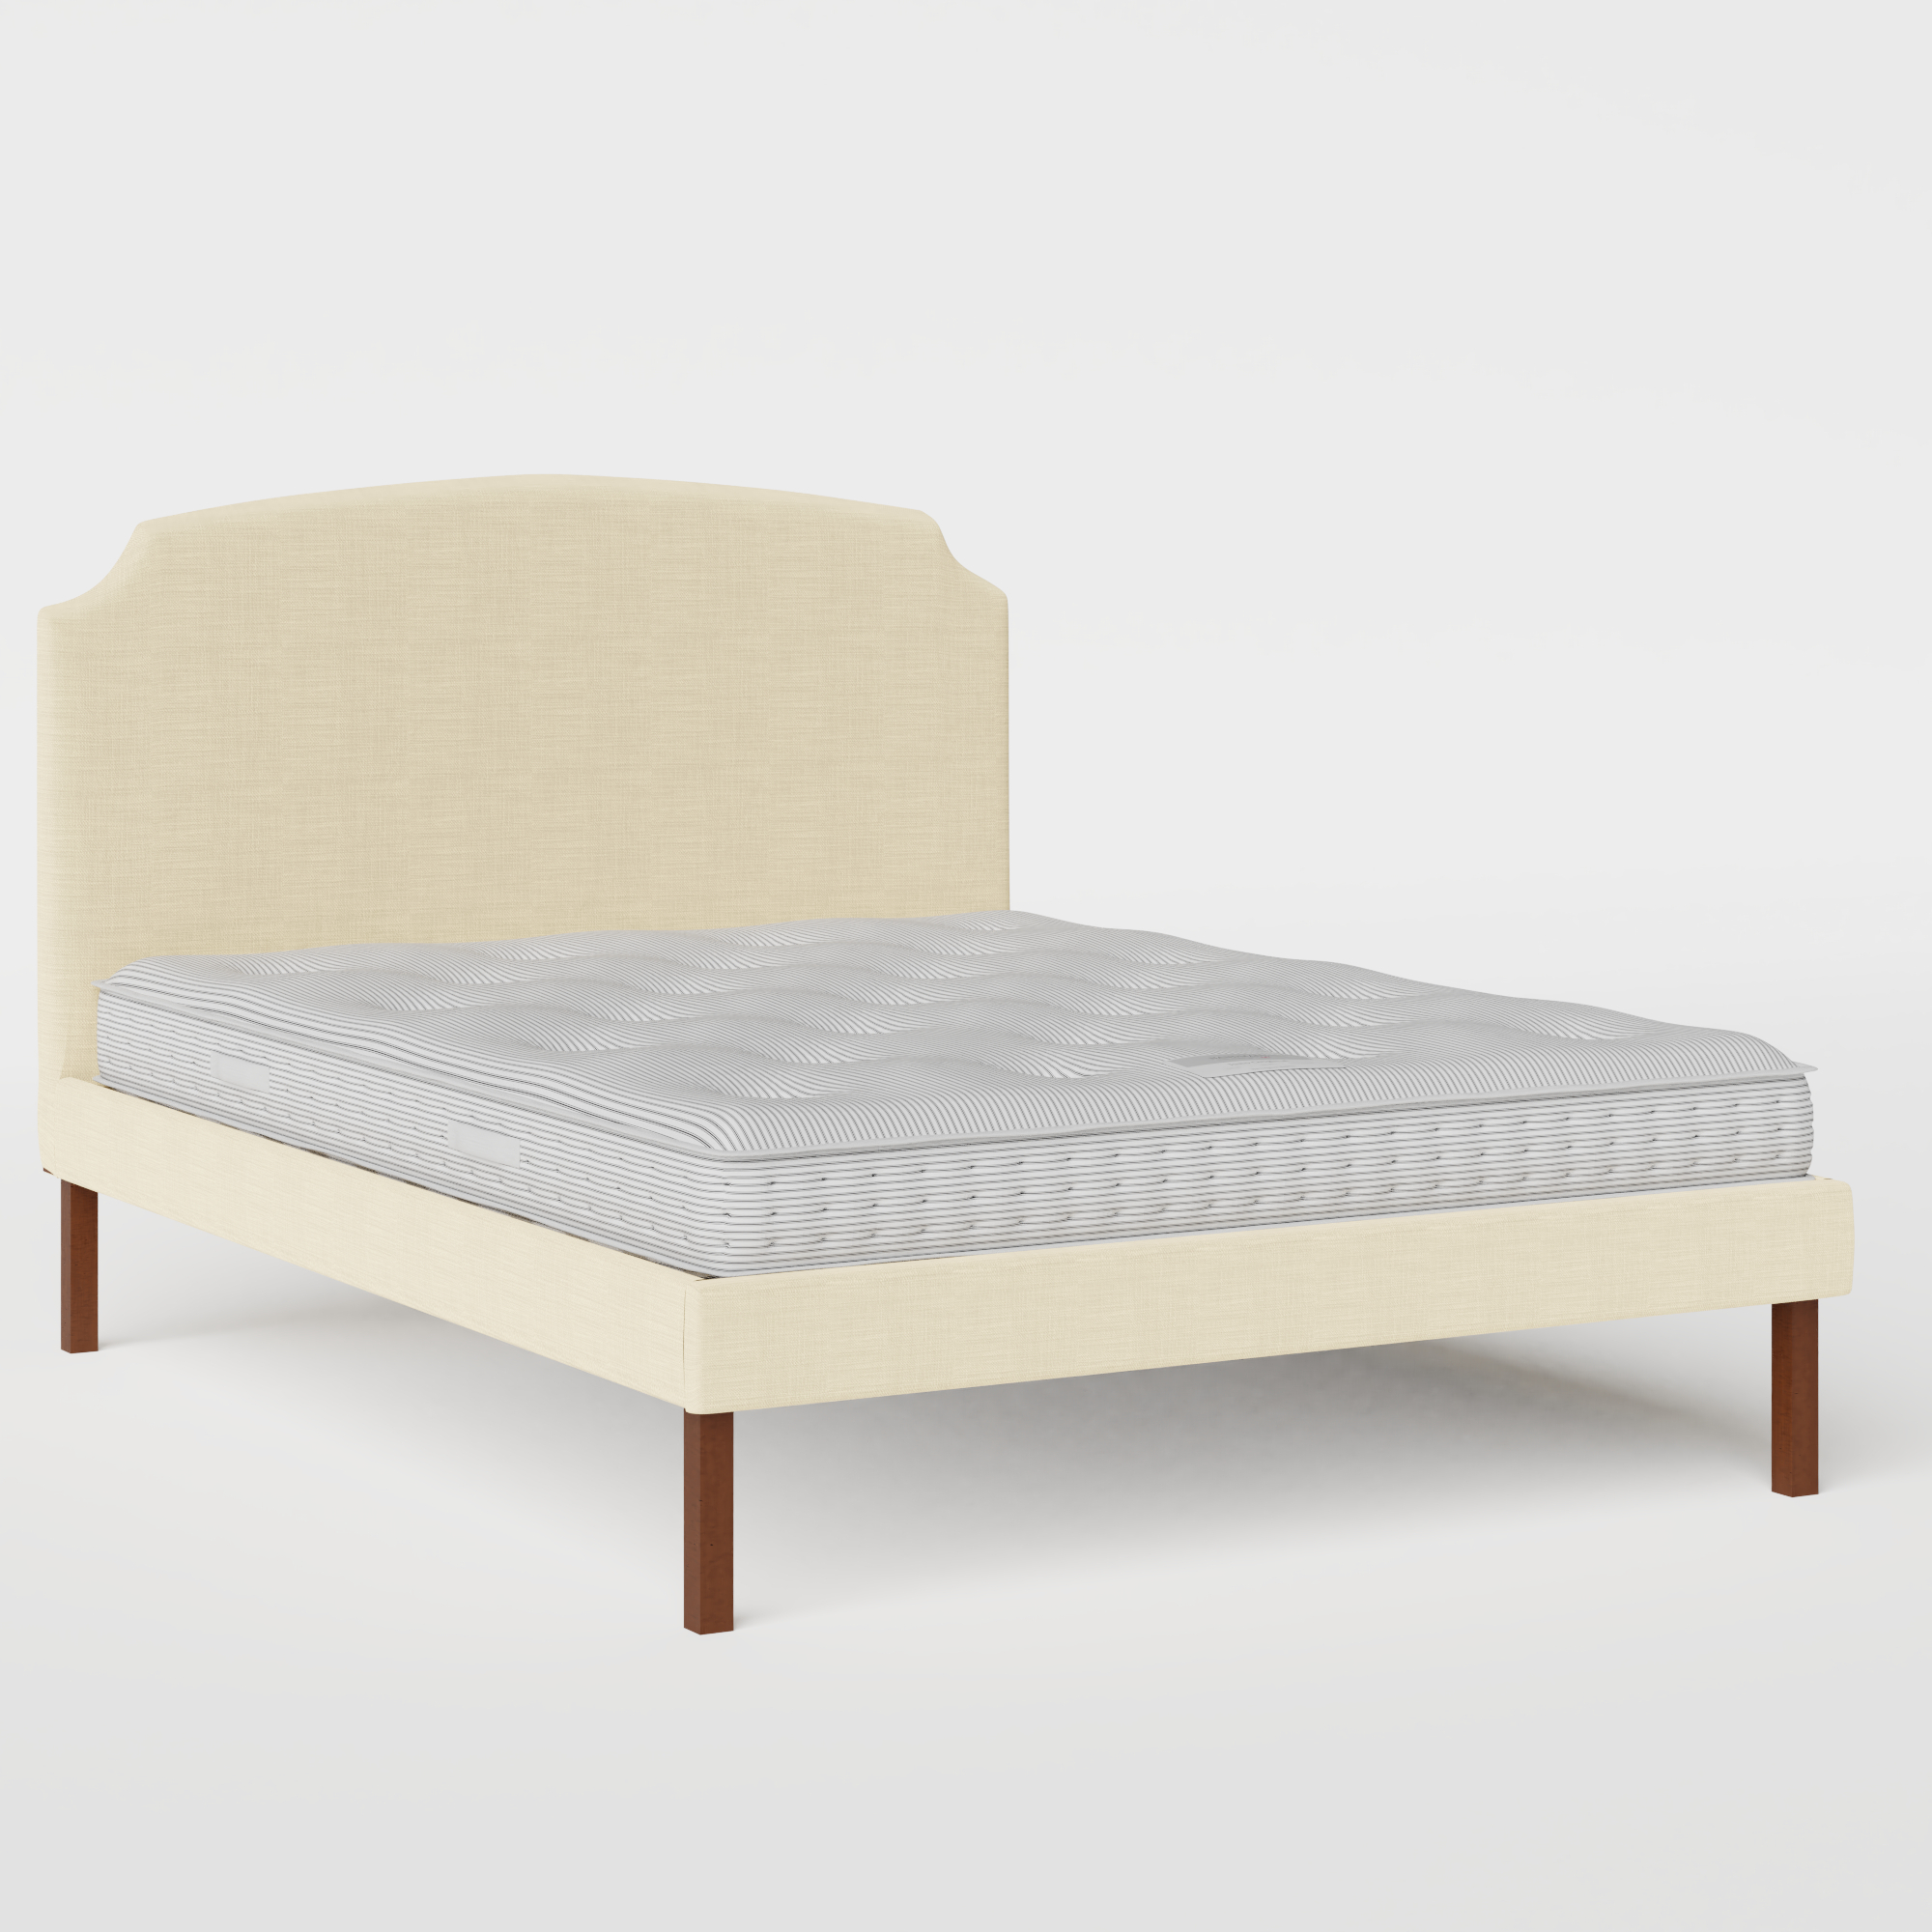 Kobe Upholstered upholstered bed in natural fabric